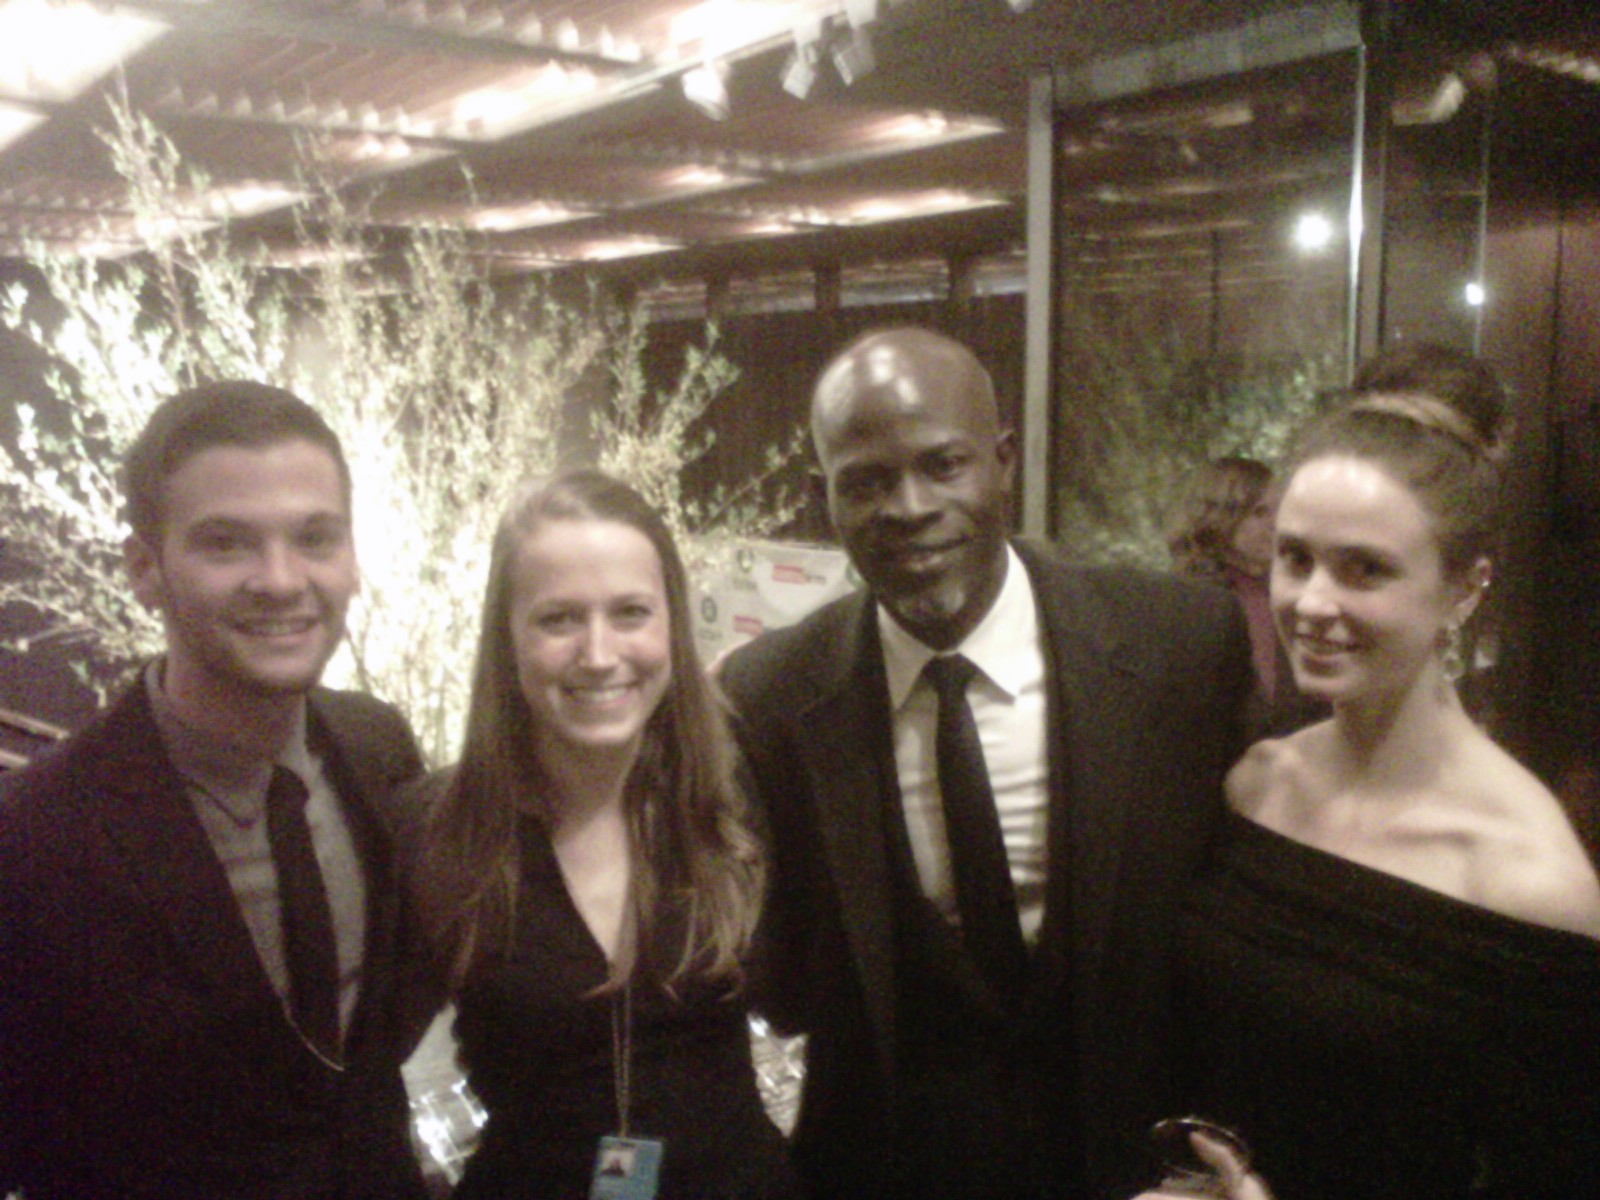 Pace University New York City students John Ciccarelli (left), Amanda Orcutt '13 (second from left) and Gillian Ashdown with Djimon Hounsou (second from right), two-time Academy Award-nominated actor and Oxfam Ambassador, at a meeting of campaigners and diplomats working on the Arms Trade Treaty negotiations in New York.